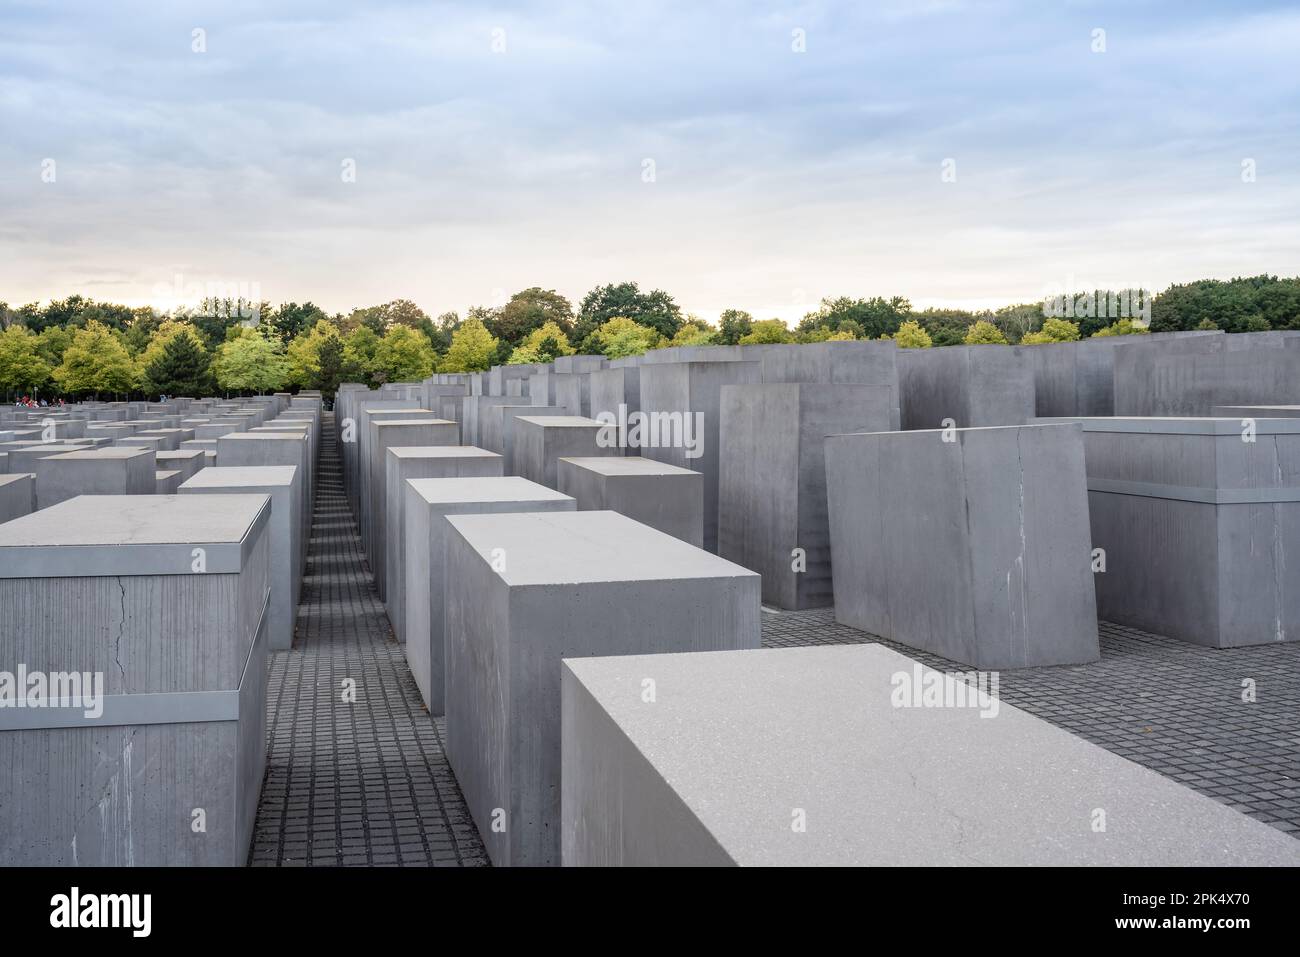 Memorial to the Murdered Jews of Europe - Berlin, Germany Stock Photo